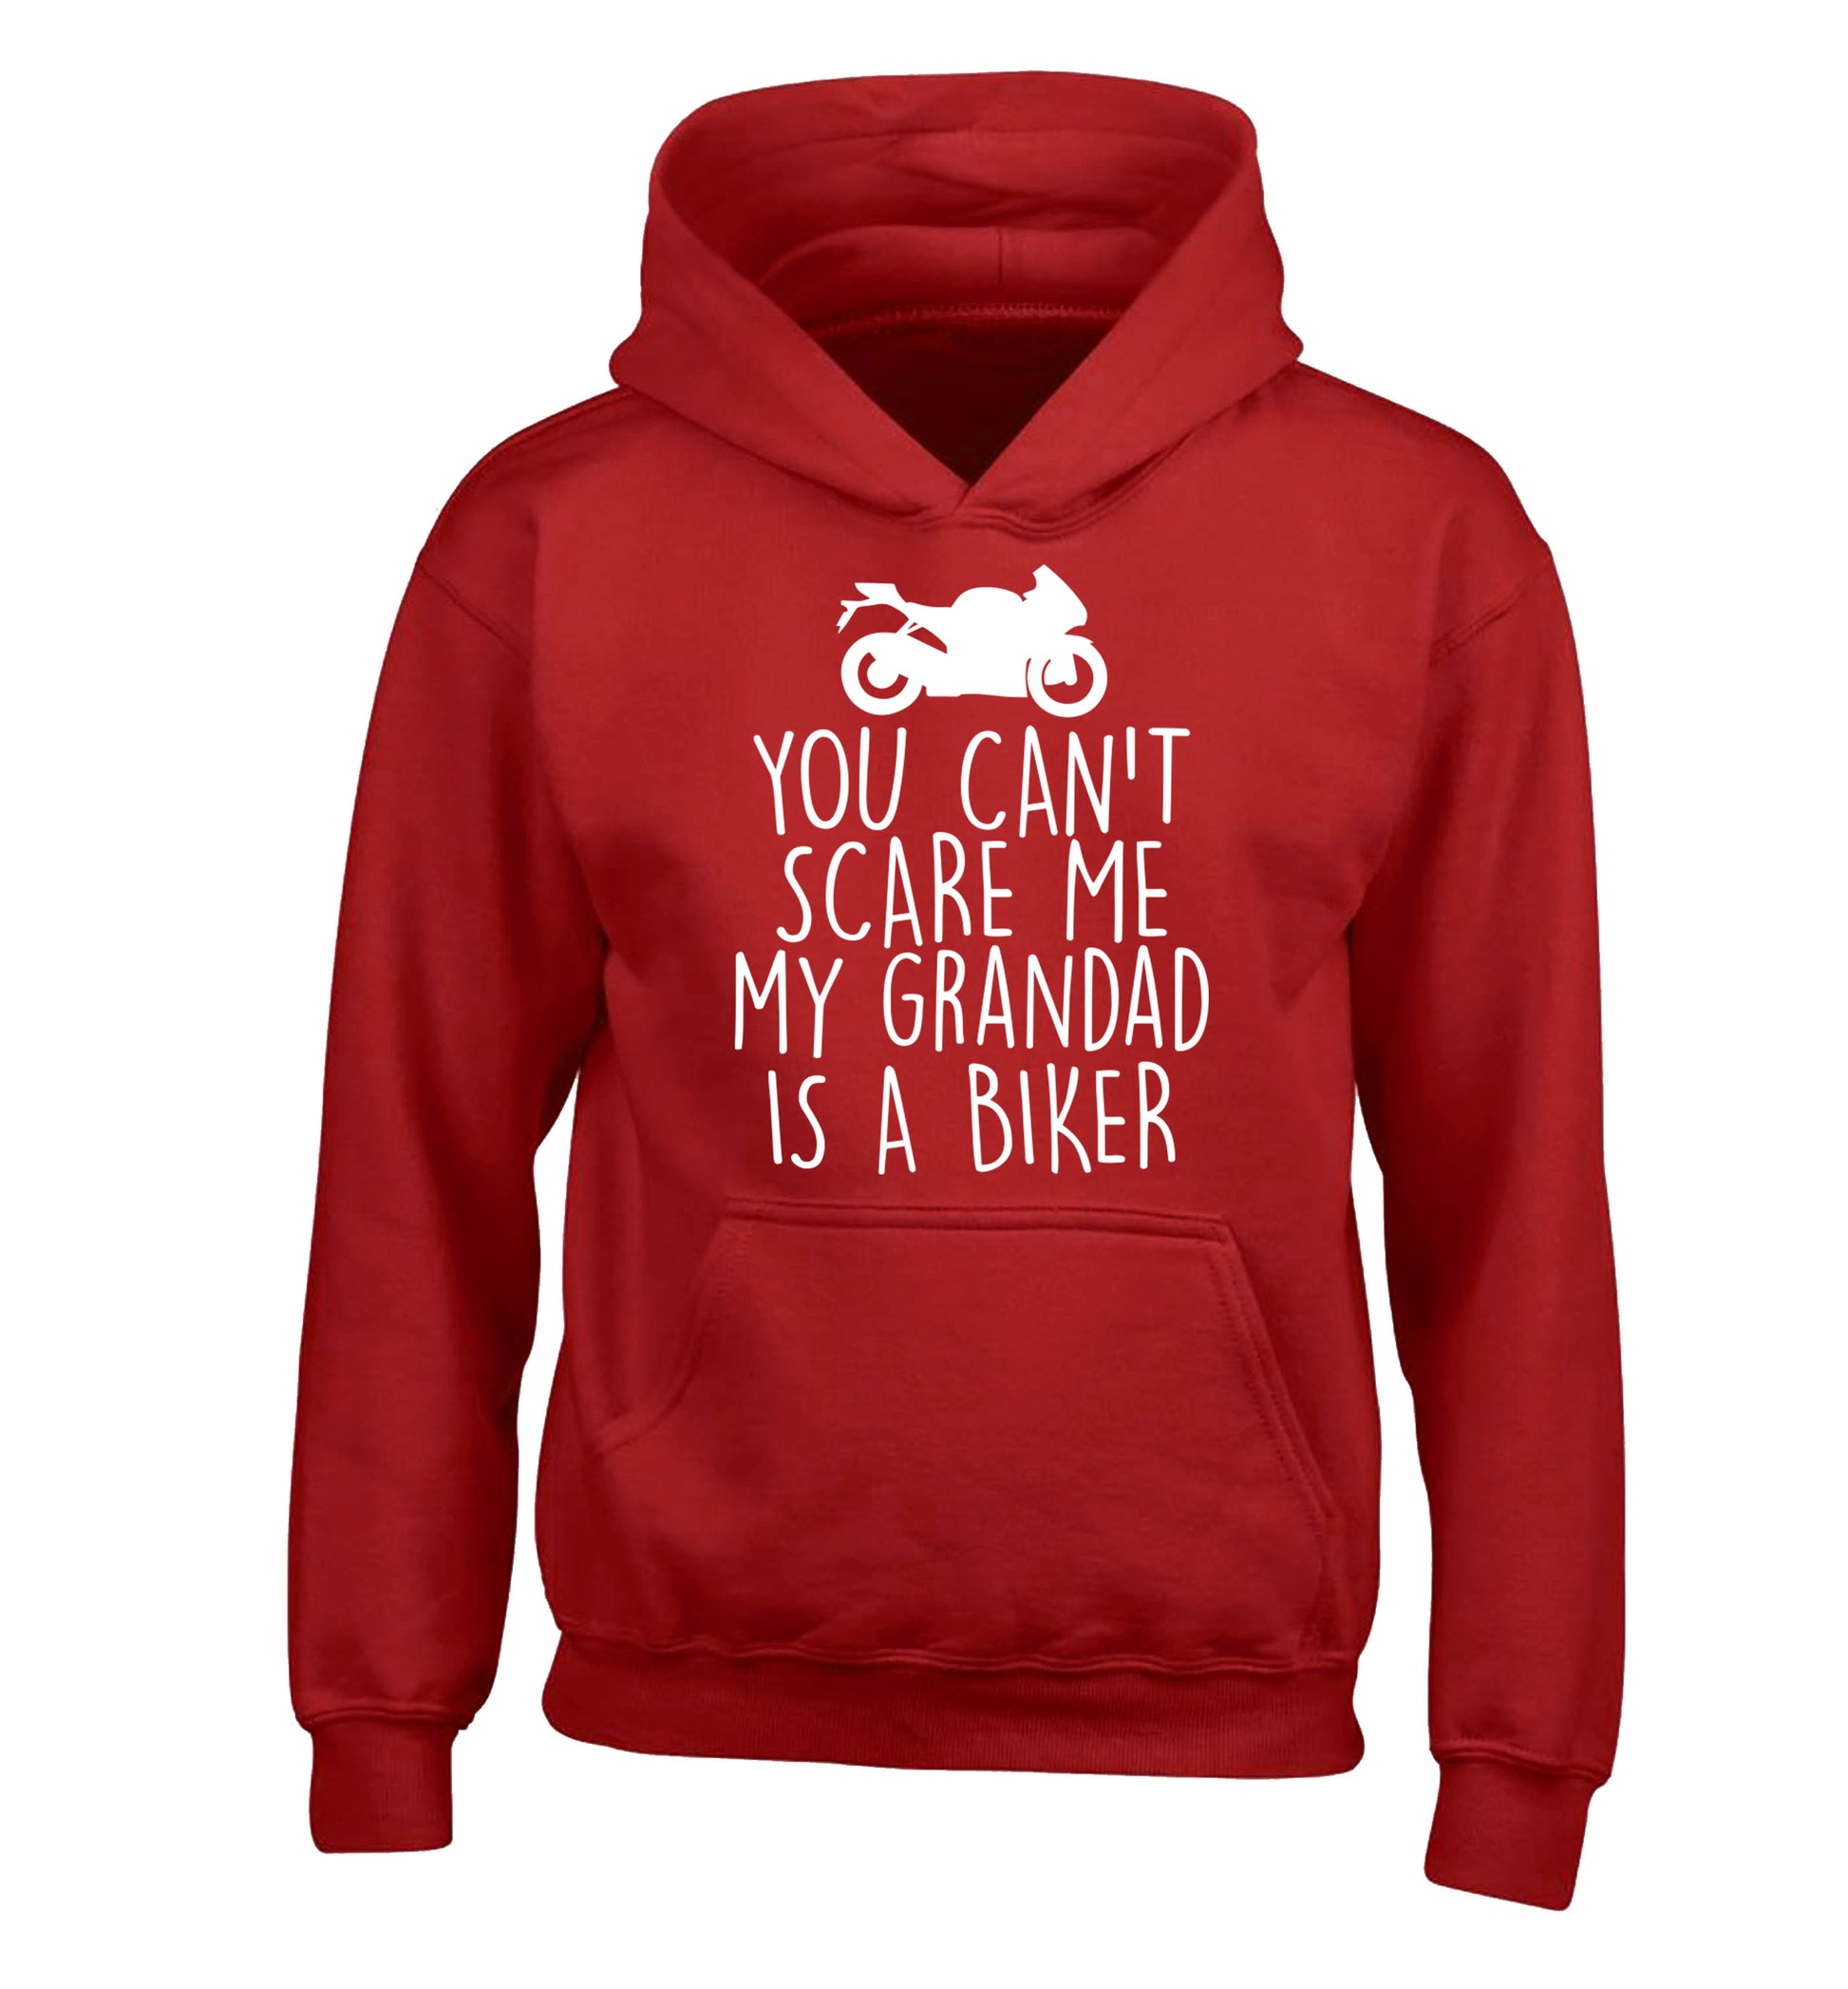 You can't scare me my grandad is a biker children's red hoodie 12-13 Years